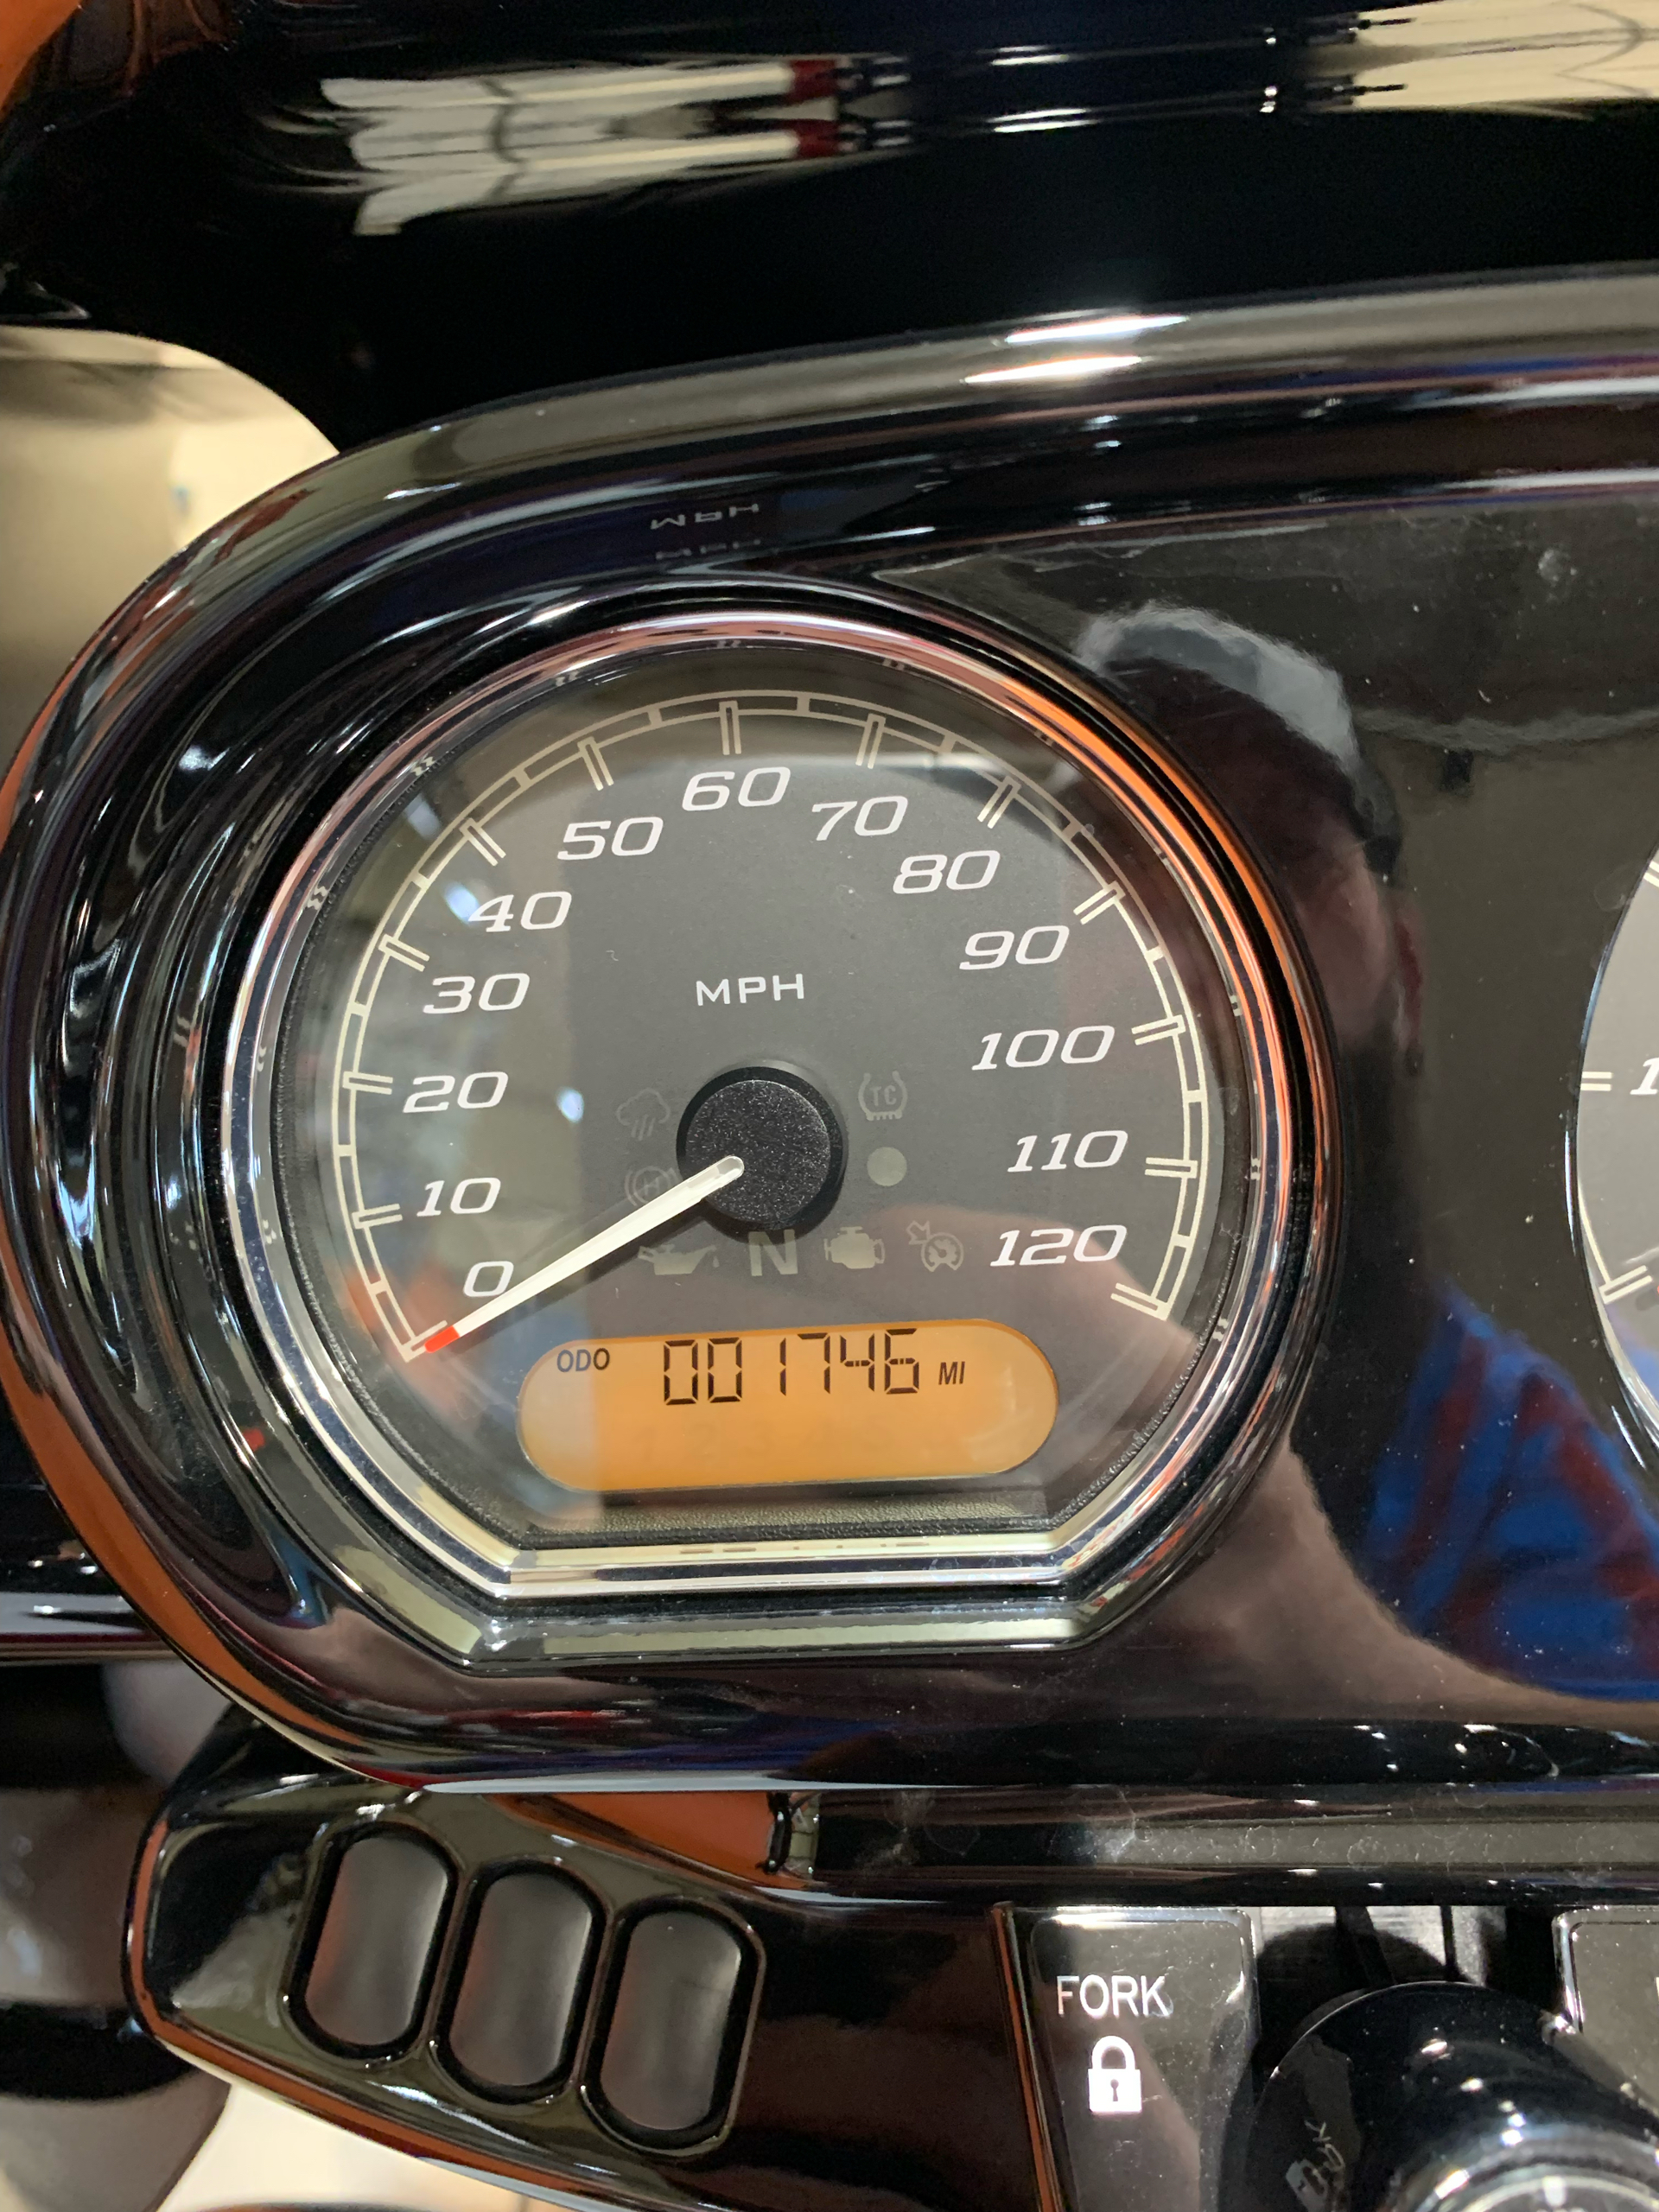 2020 Harley-Davidson ROAD GLIDE SPECIAL in Dumfries, Virginia - Photo 6